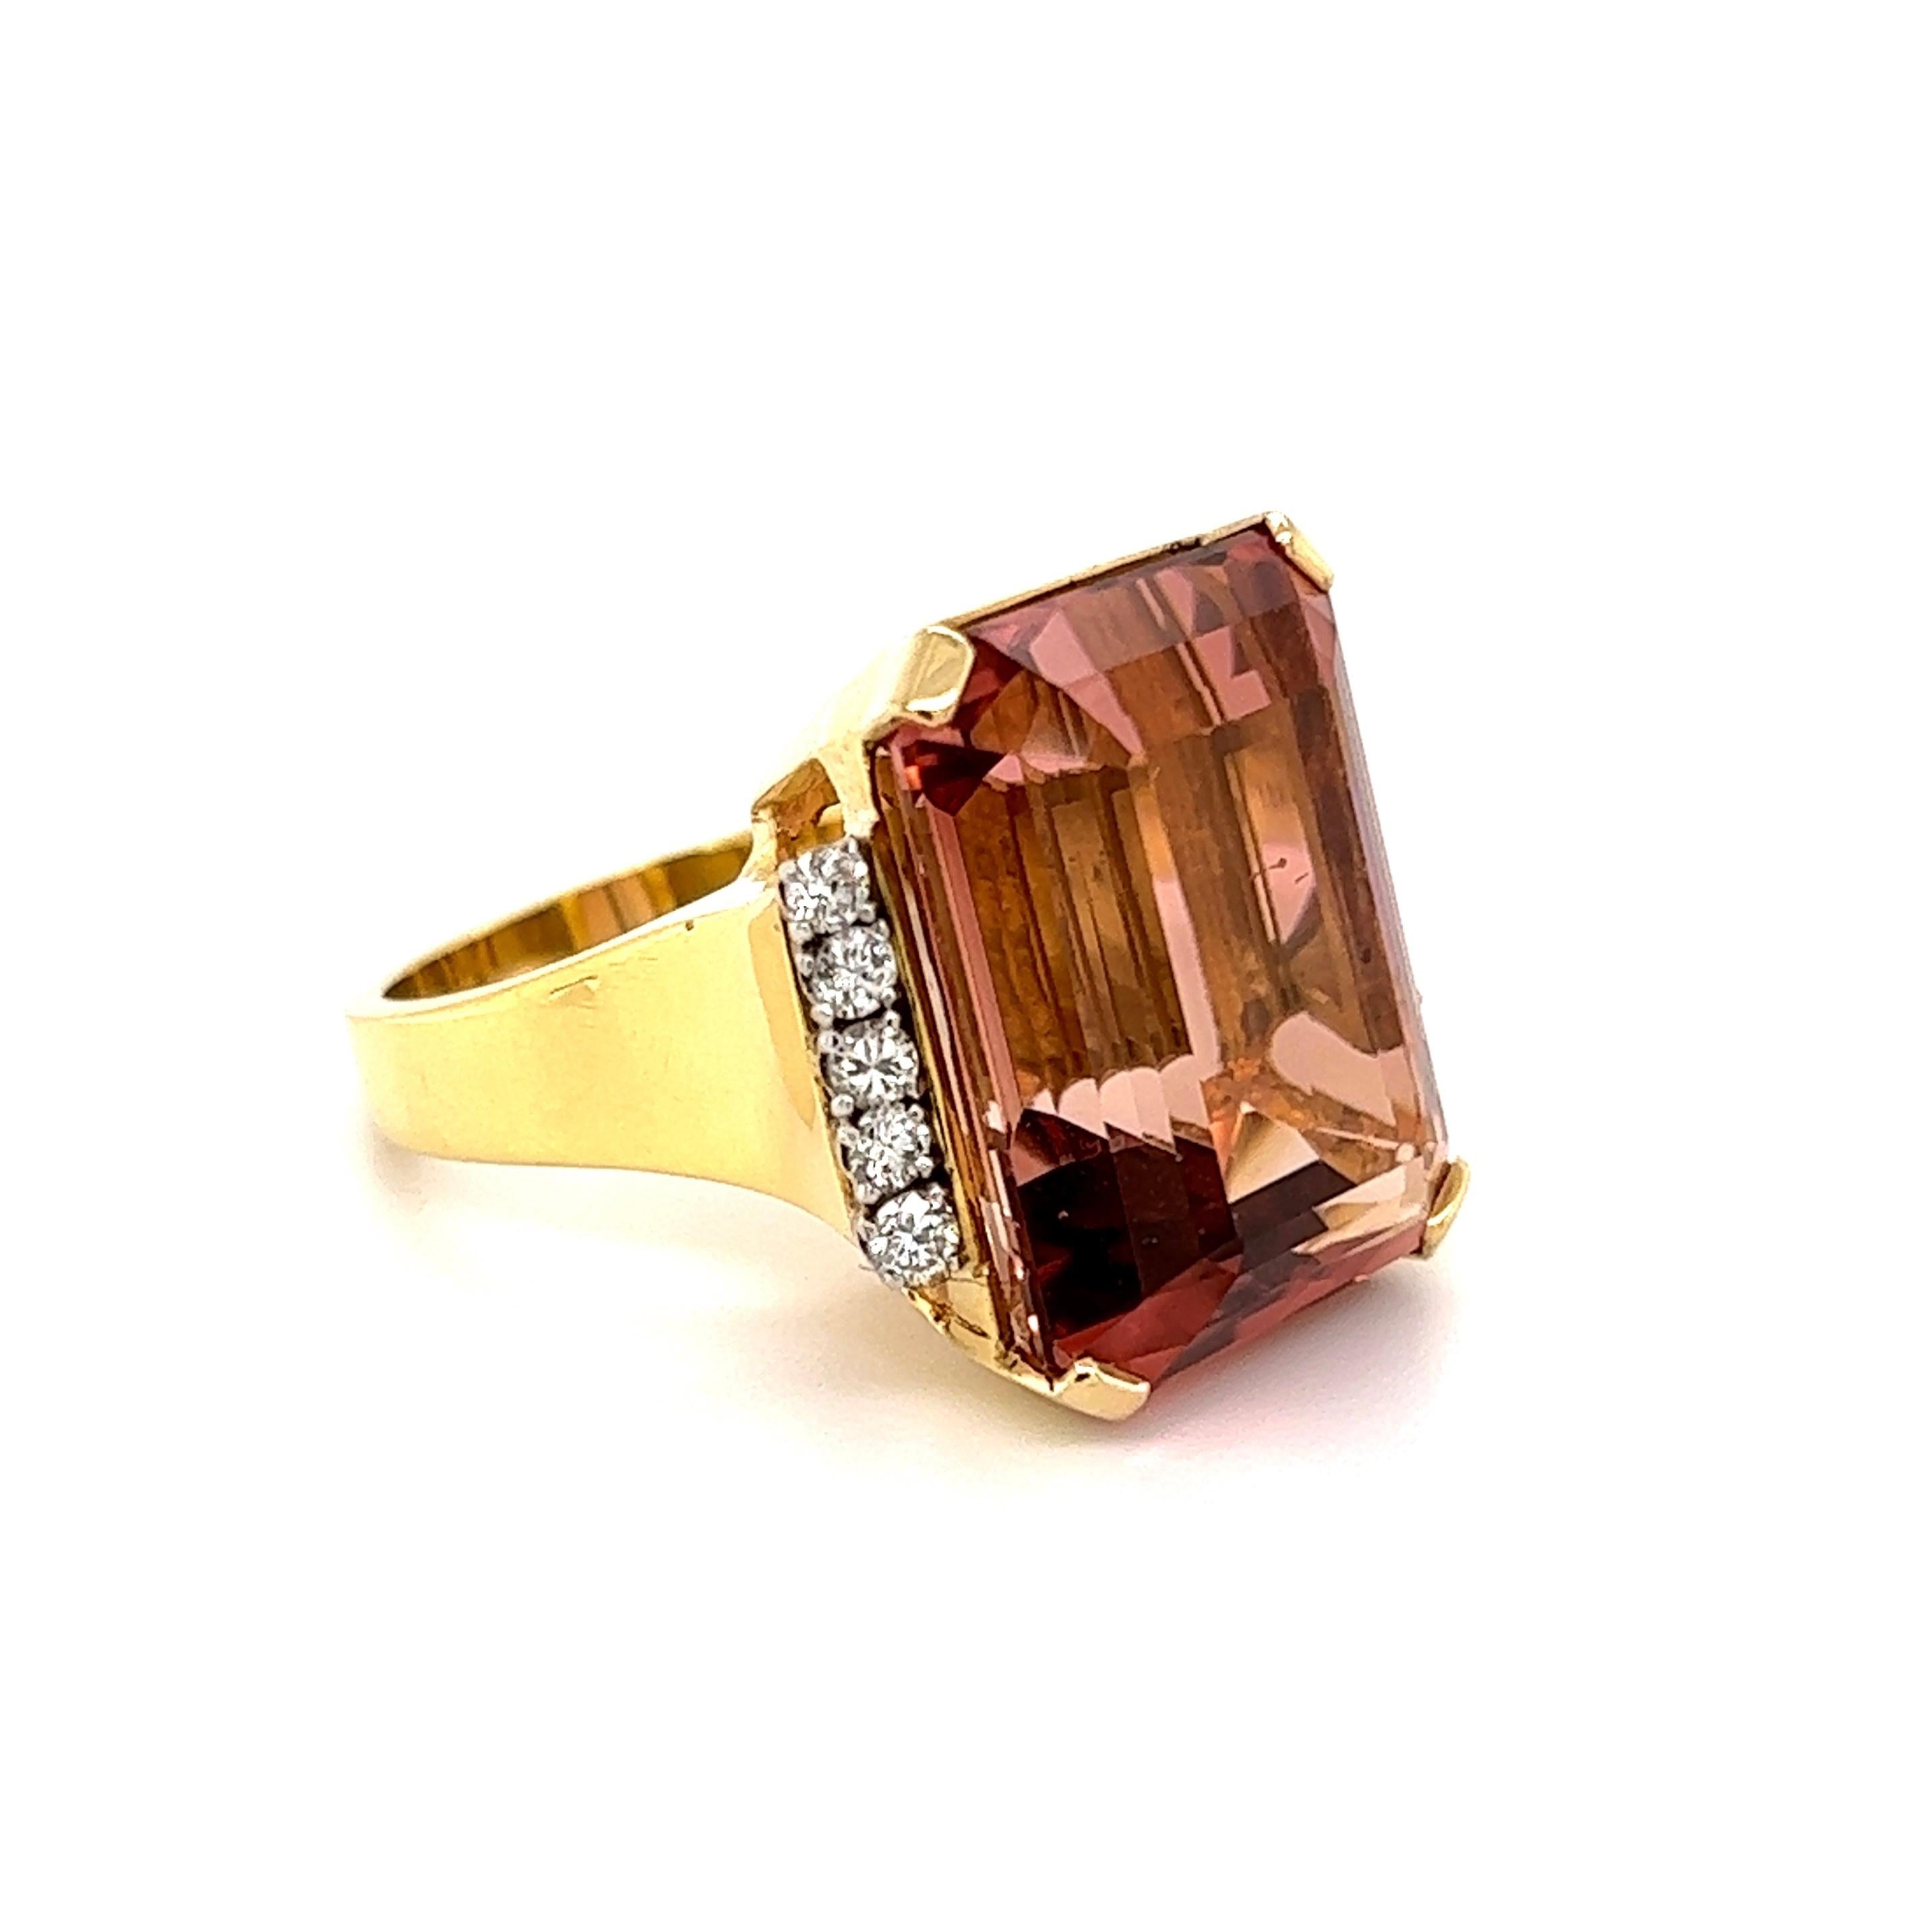 Simply Beautiful! Finely detailed Rare Peach Tourmaline and Diamond 18K Gold Cocktail Ring. Centering a securely nestled Emerald-Cut Peach Tourmaline, weighing approx. 27.90 Carats either side set with Round Diamonds; weighing approx. 0.40tcw.